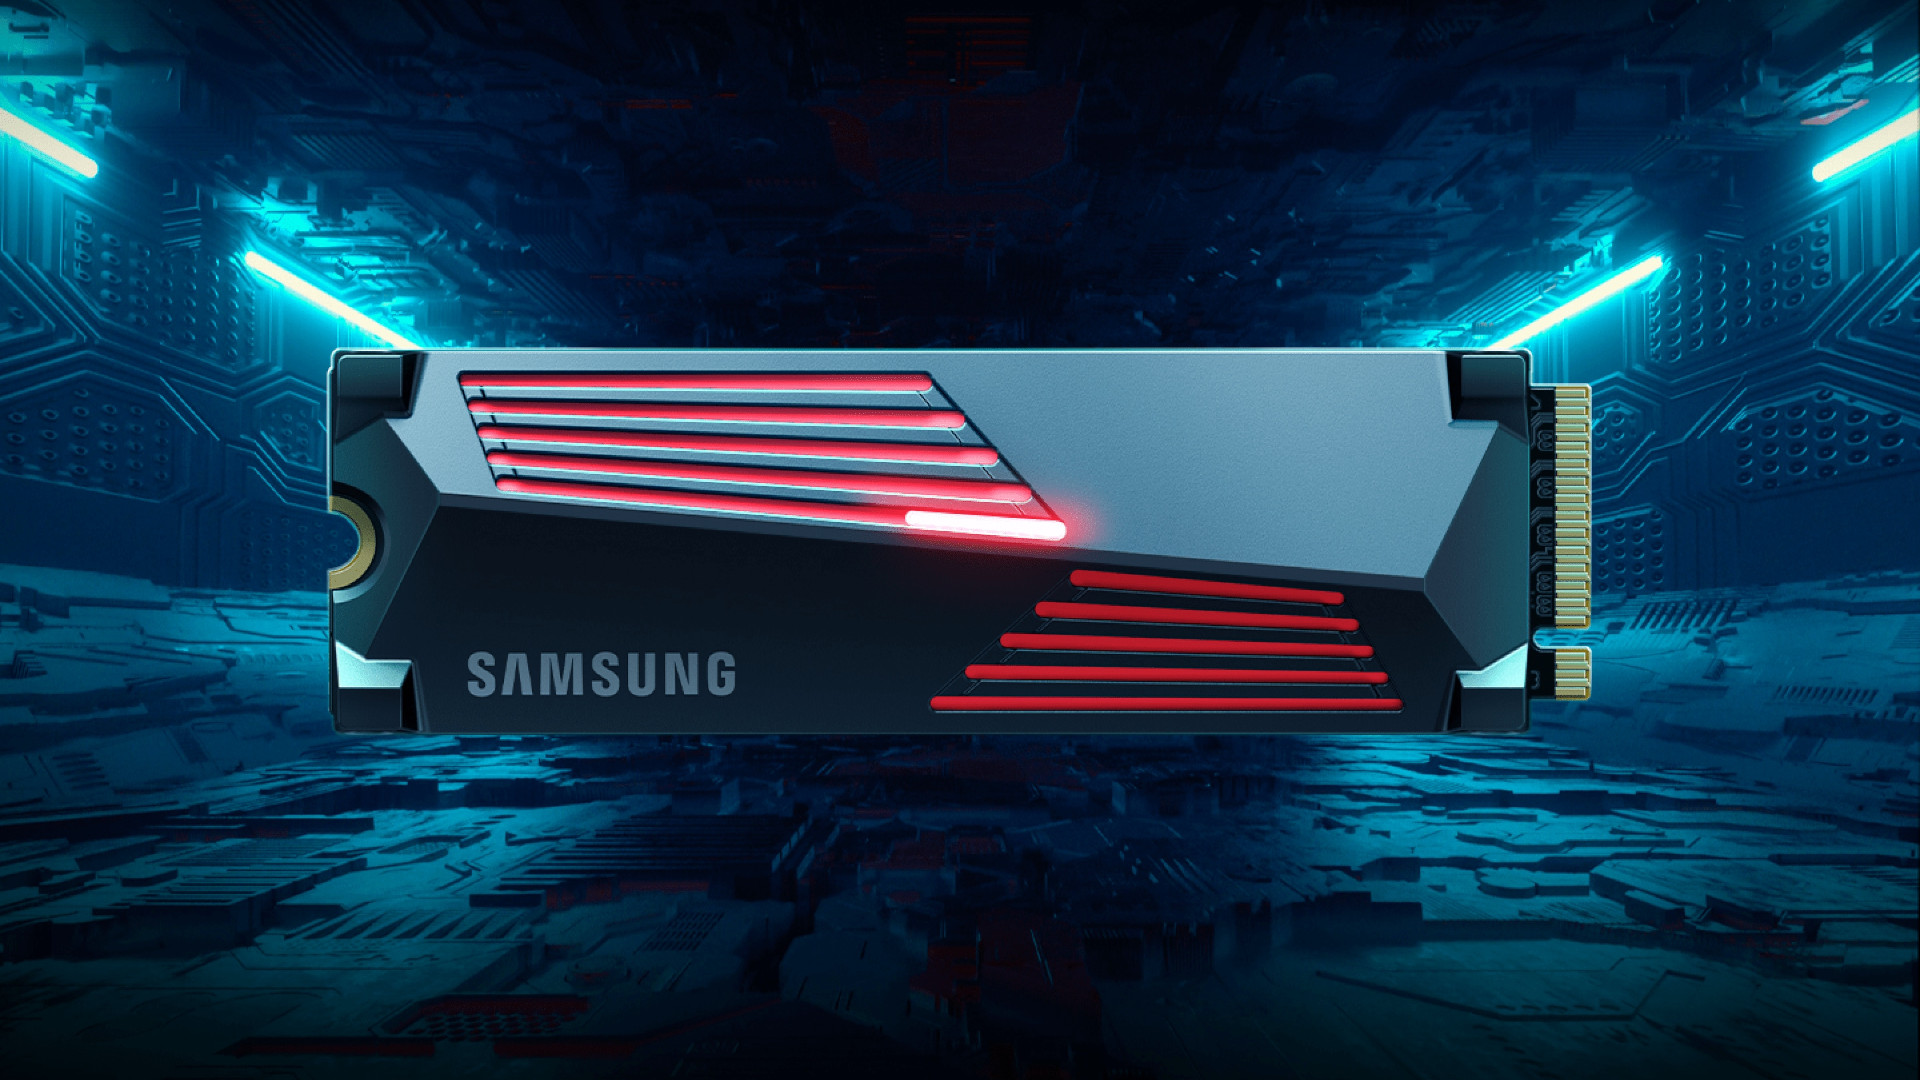 The Samsung 990 Pro is now the fastest NVMe M.2 SSD